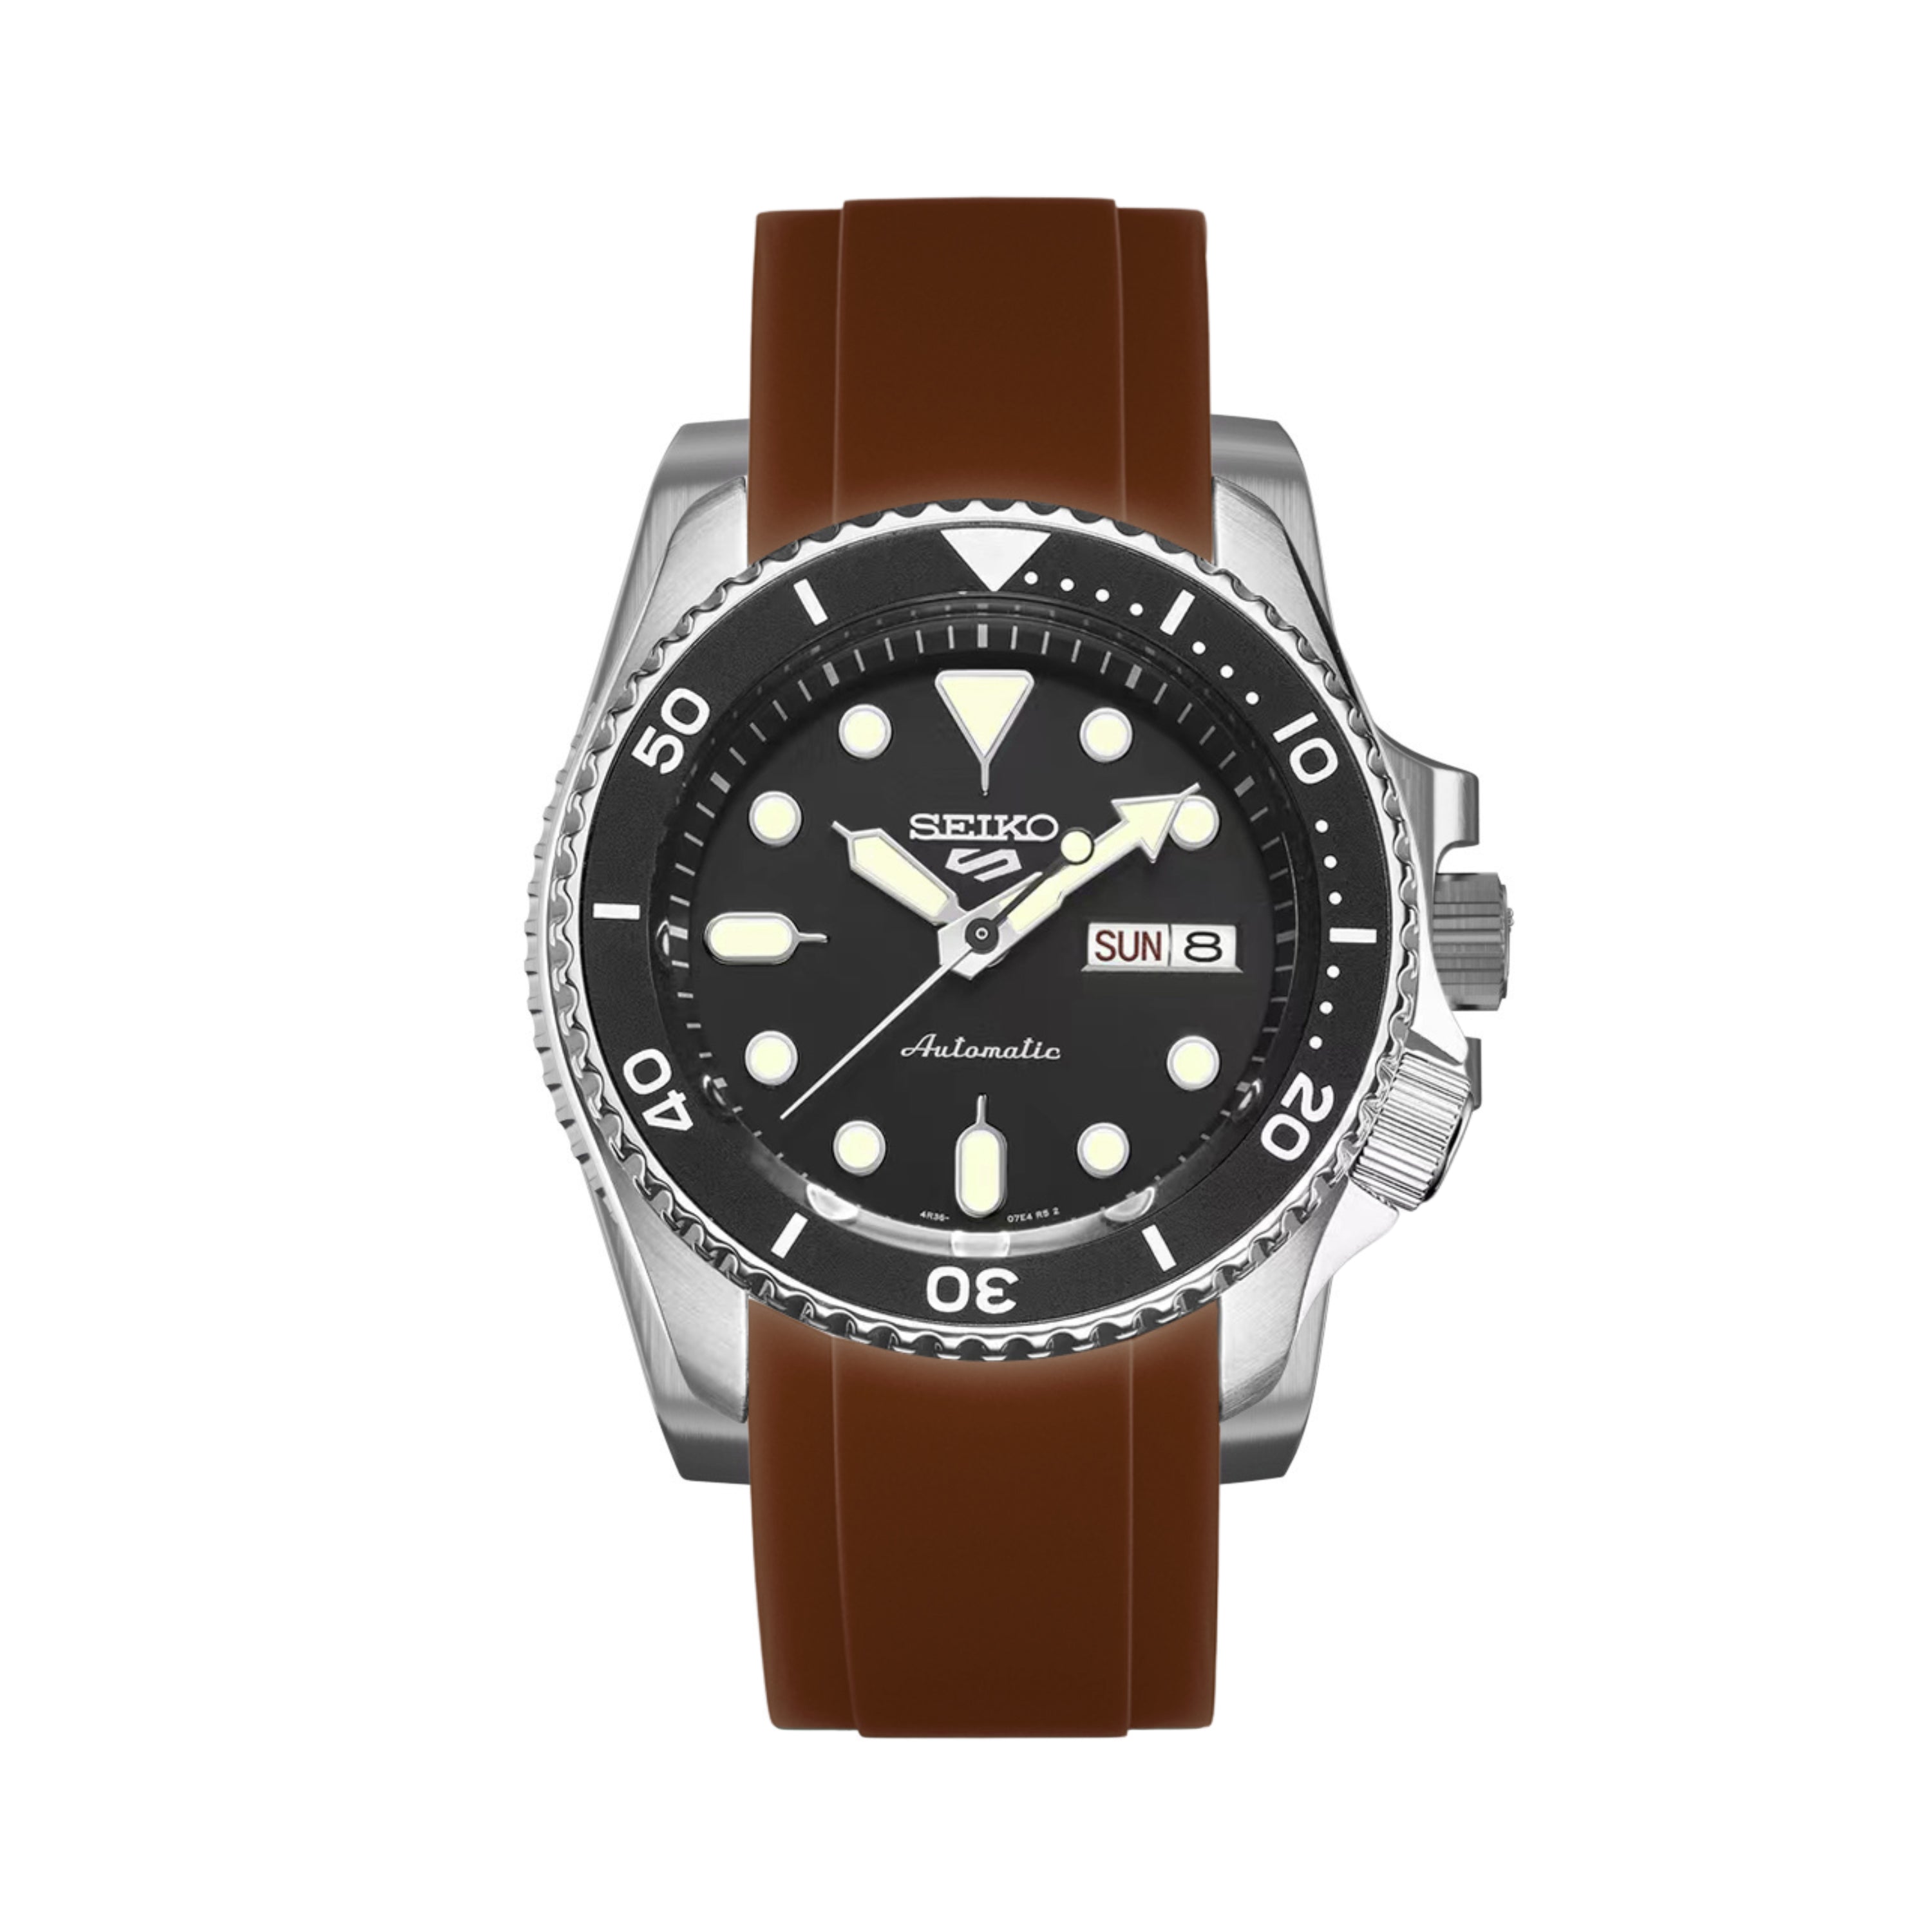 Curved End Soft Silicone Strap - Compatible with Seiko SKX - Brown (2418)